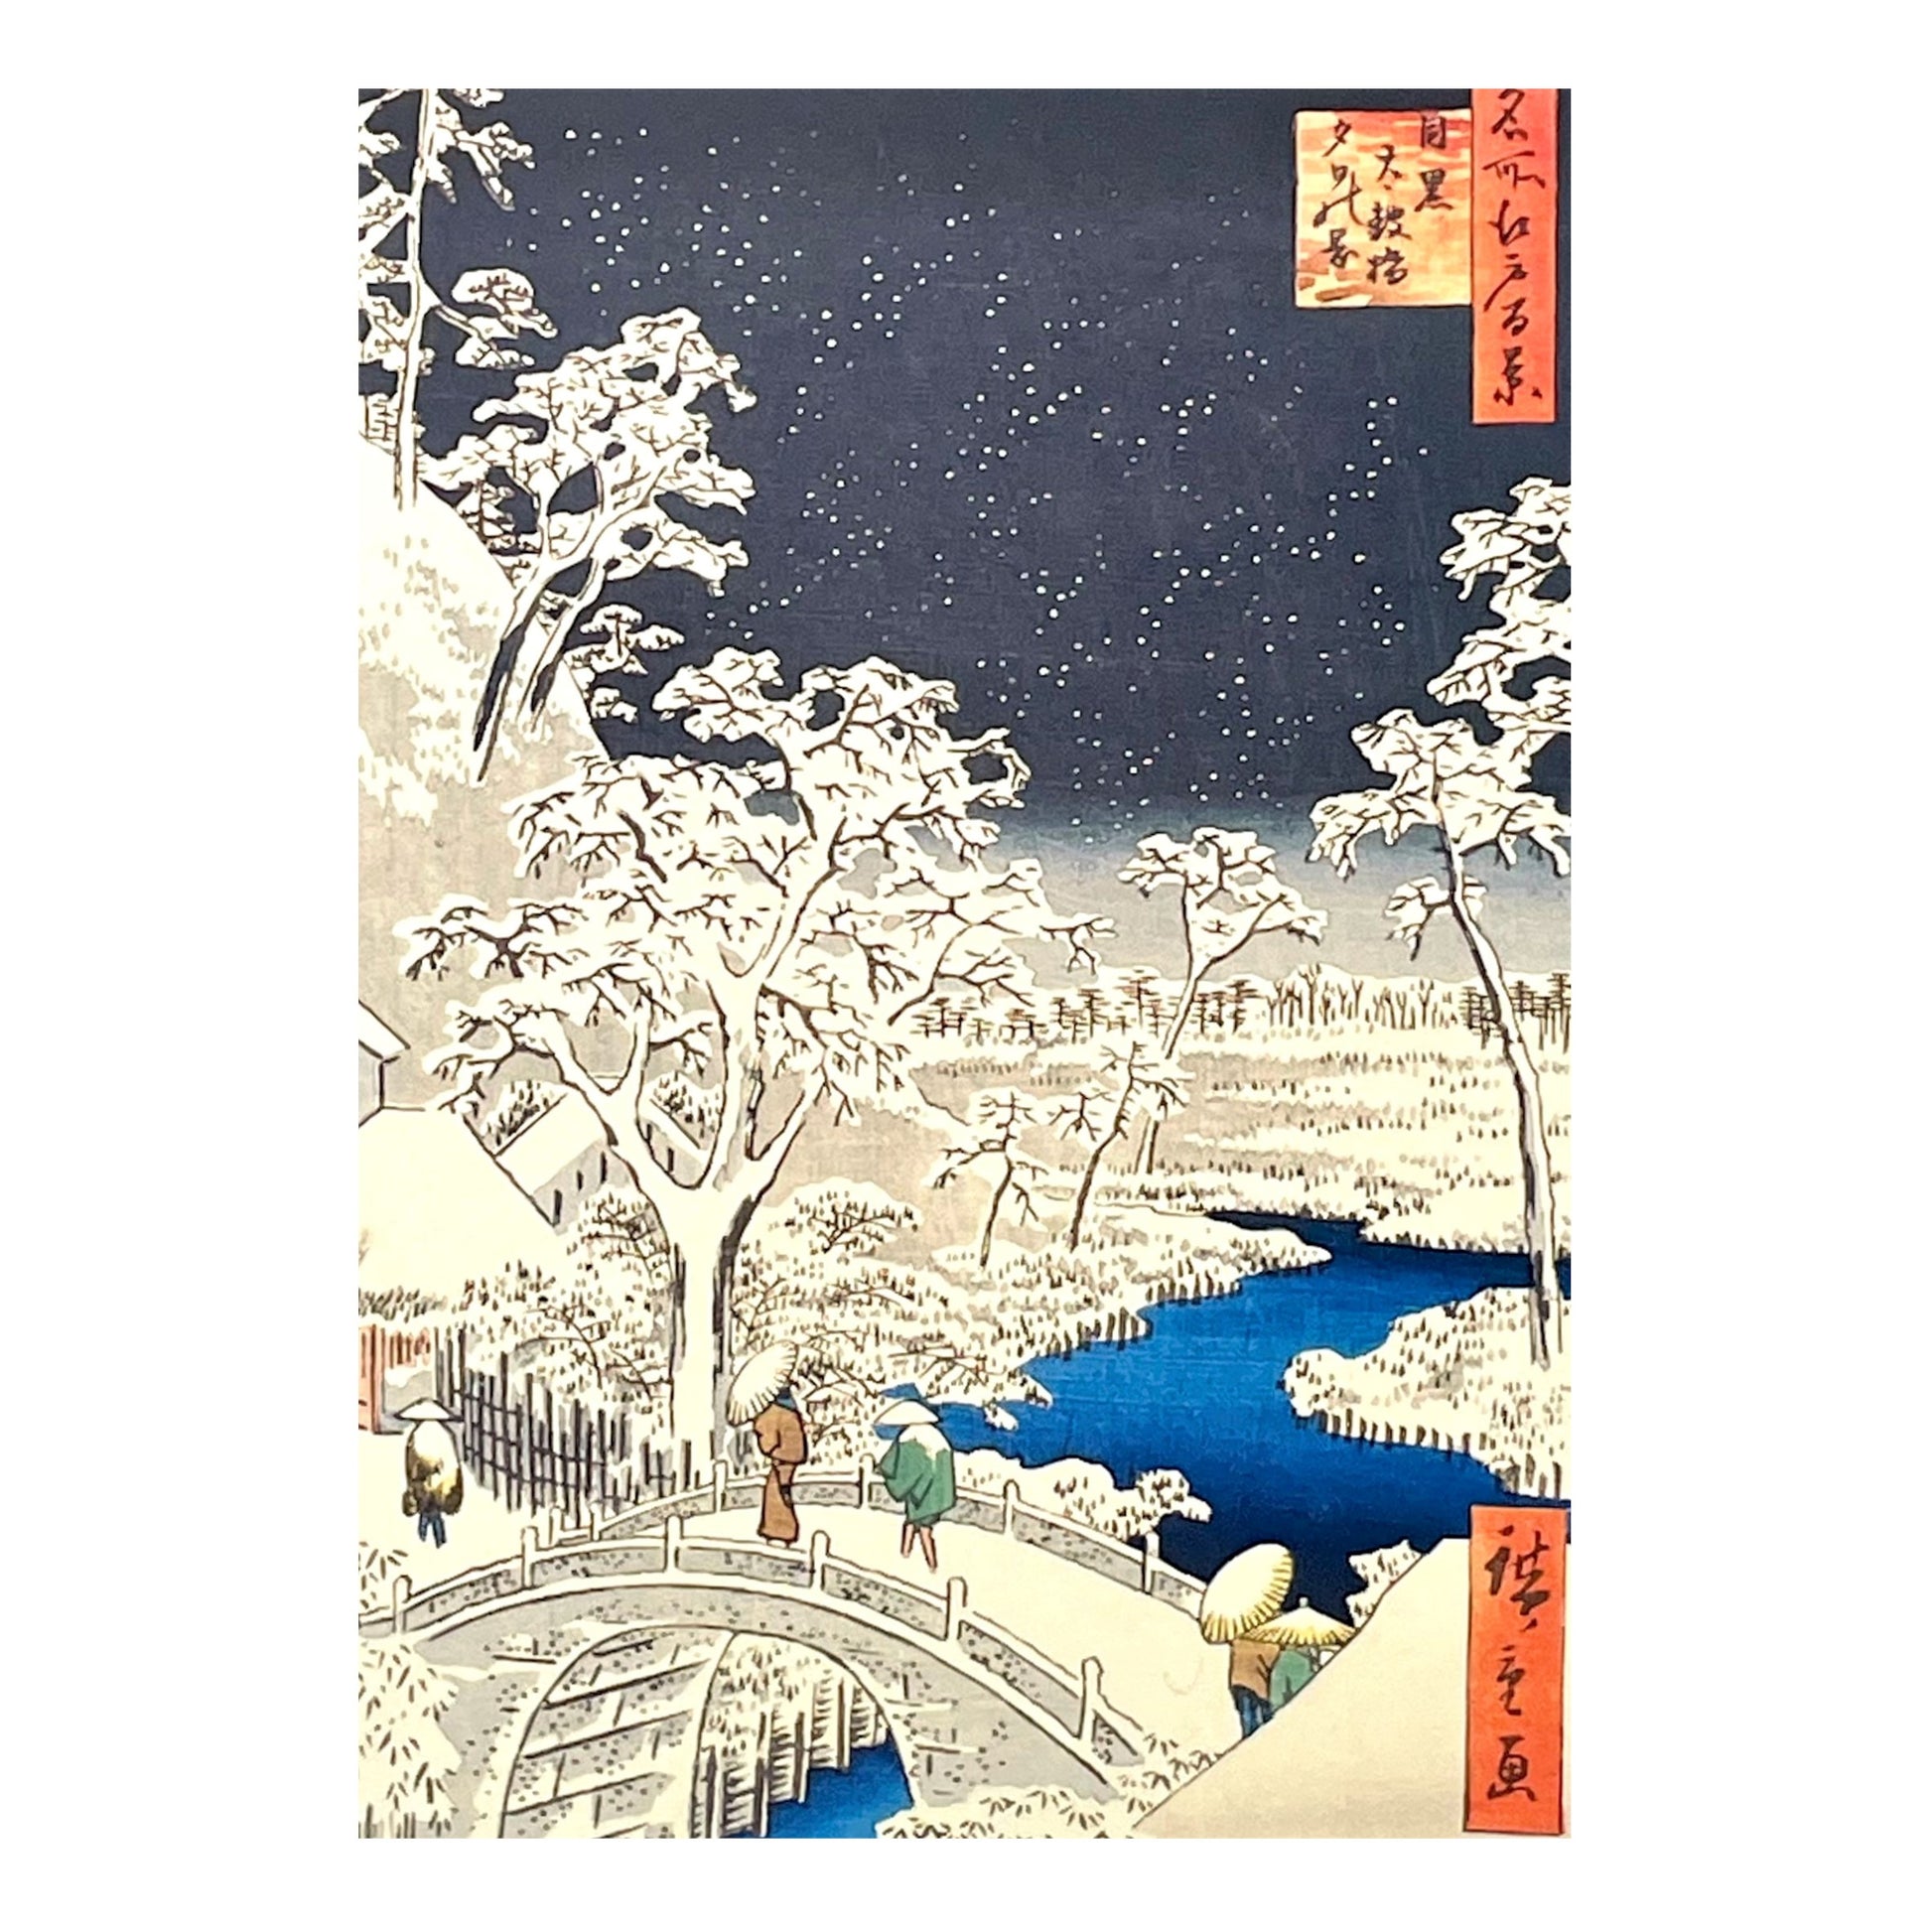 greetings card of yuhi hill and drum bridge at meguro in the snow by John Austin Publishing